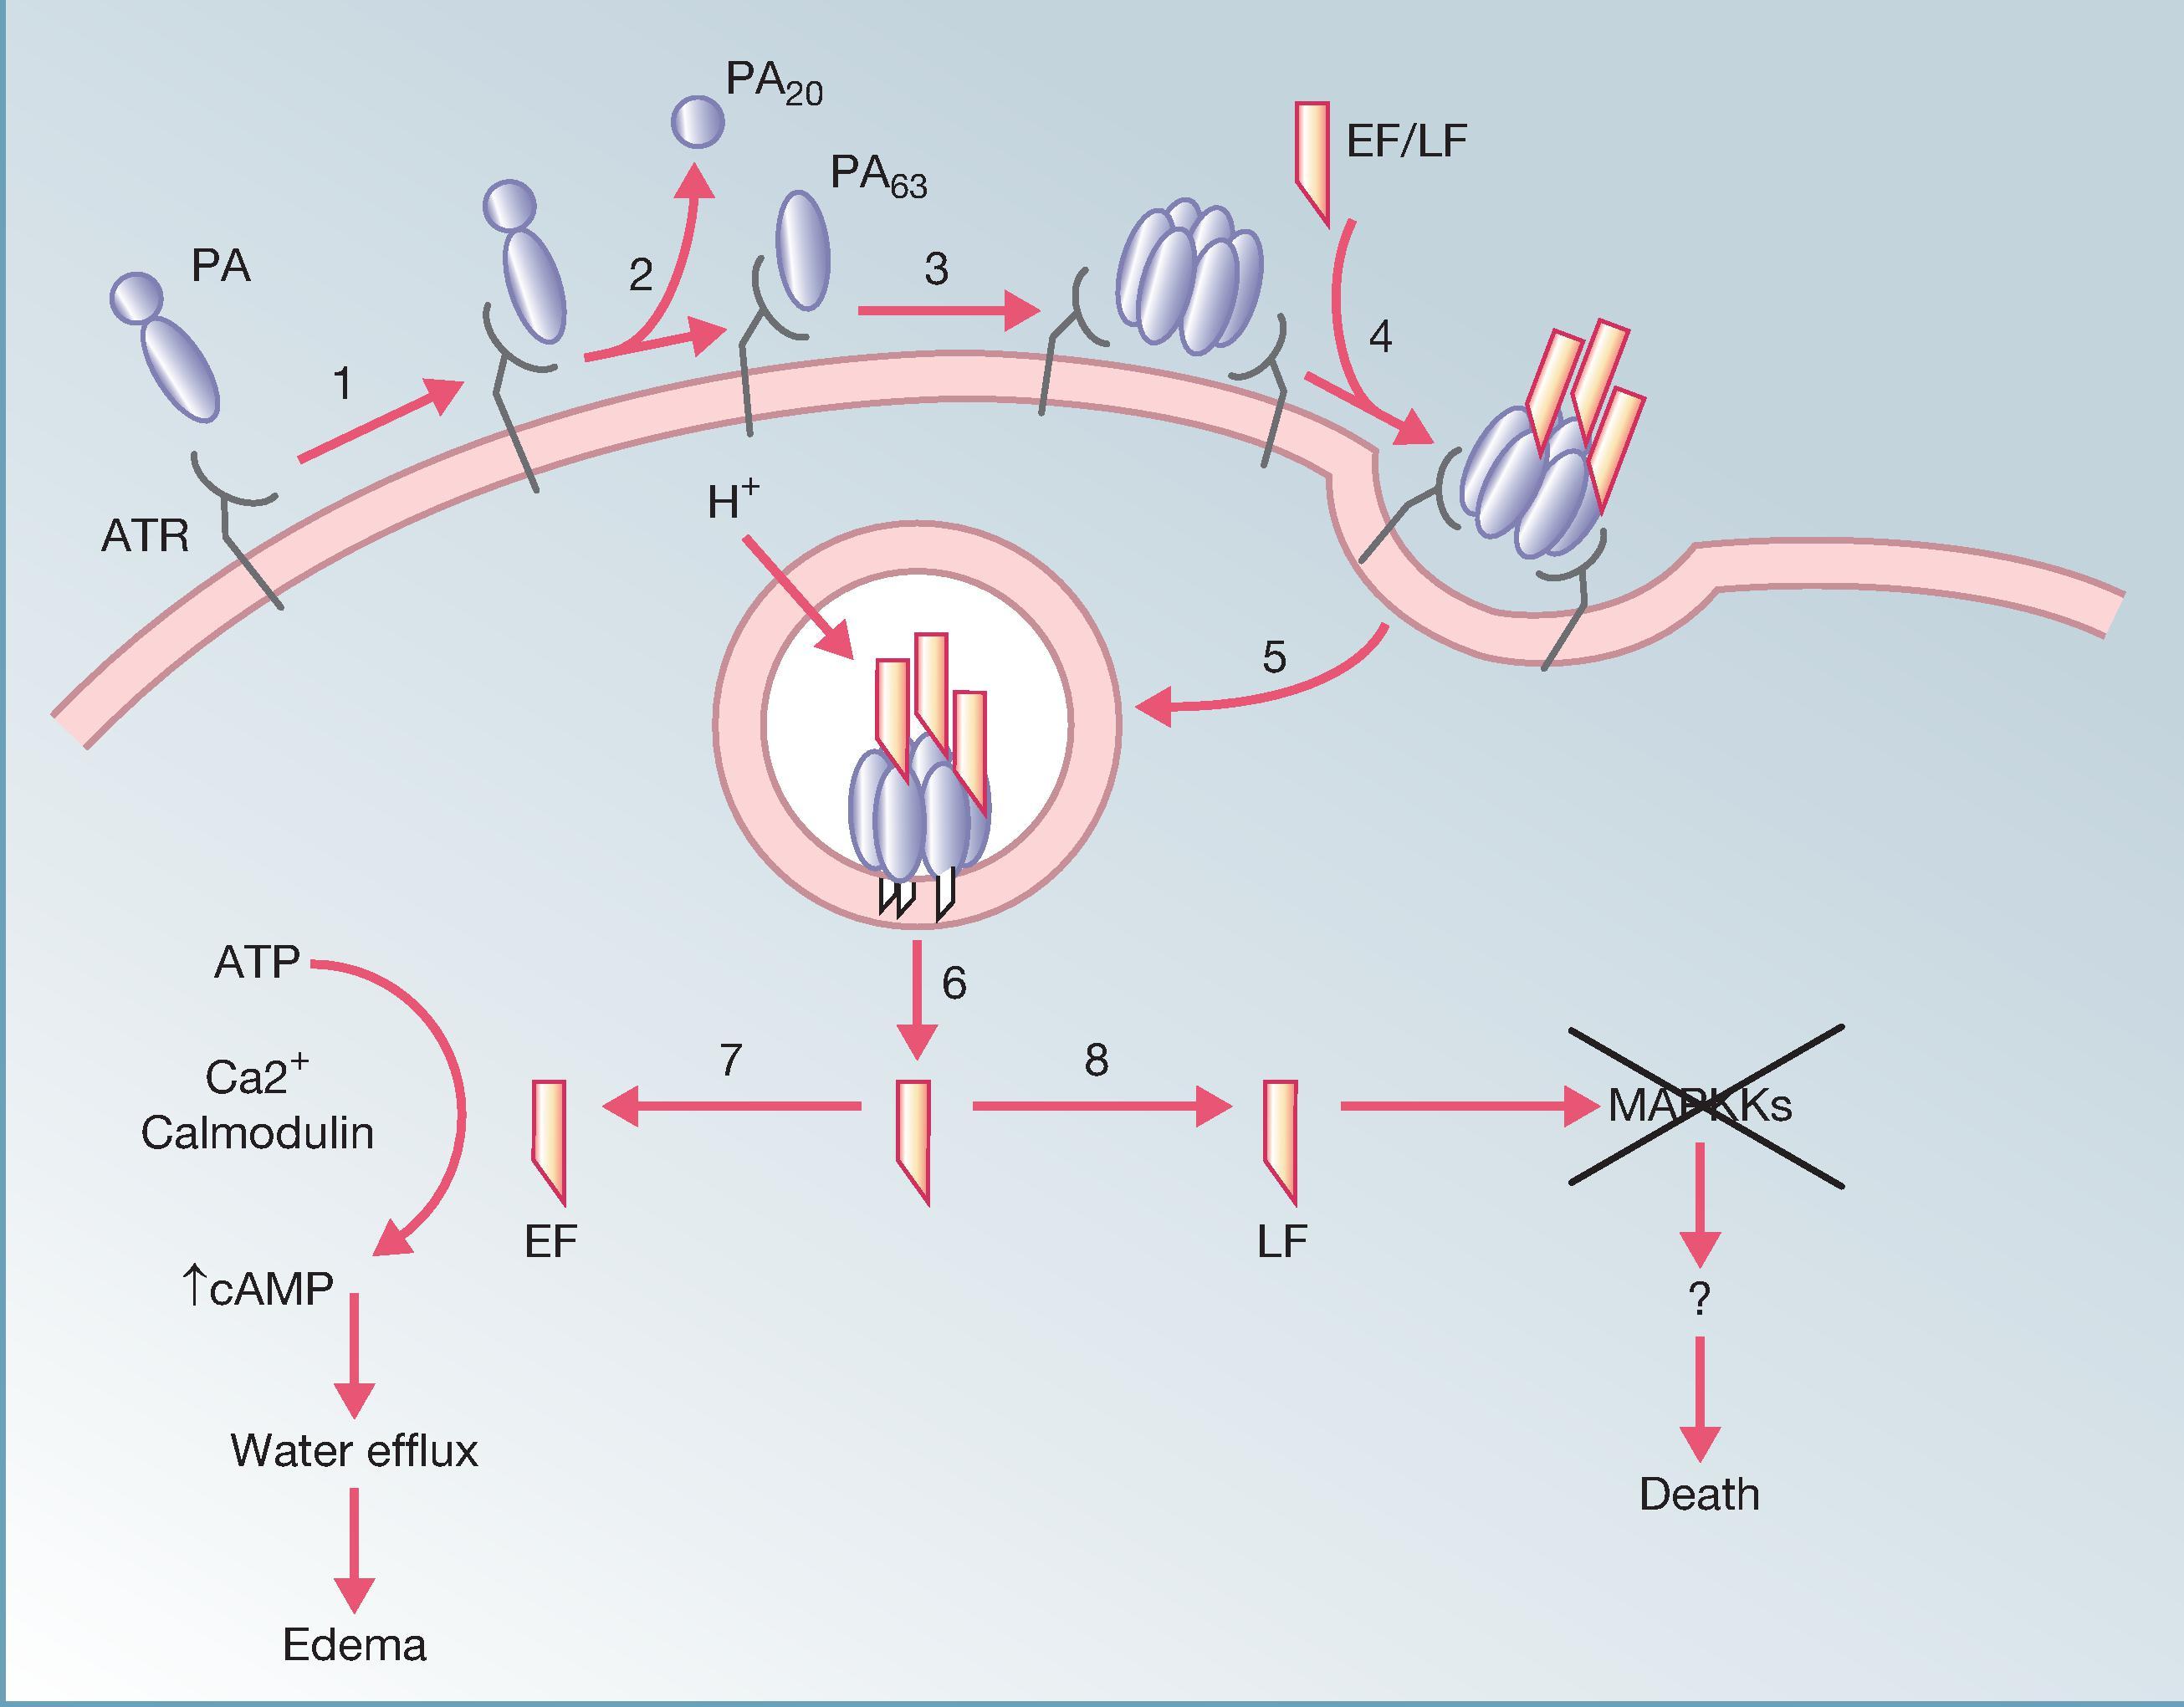 Fig. 12.1, Model of anthrax toxin action. Protective antigen (PA) secreted by Bacillus anthracis binds to a membrane protein receptor (ATR) (1) , two of which have been described. The PA is then cleaved by the protease furin (2) with release of a 20-kDa fragment and oligomerization of the remaining 63-kDa monomer (3) . The PA 63 oligomer then binds edema factor (EF) or lethal factor (LF) (4) . The complete toxin is then endocytosed (5) and trafficked to endosomes. At the low pH of the endosomes, the oligomer inserts into the membrane resulting in translocation of EF/LF to the cytosol (6) . EF causes an increase in cyclic adenosine monophosphate (cAMP) (7) , while LF cleaves mitogen-activated protein kinases (MAPKKs) (8) resulting in host cell damage and death of some cell types. PA can also be cleaved by proteases in the circulation to the 63-kDa monomer and form oligomers with EF/LF which then bind to host cell receptors.